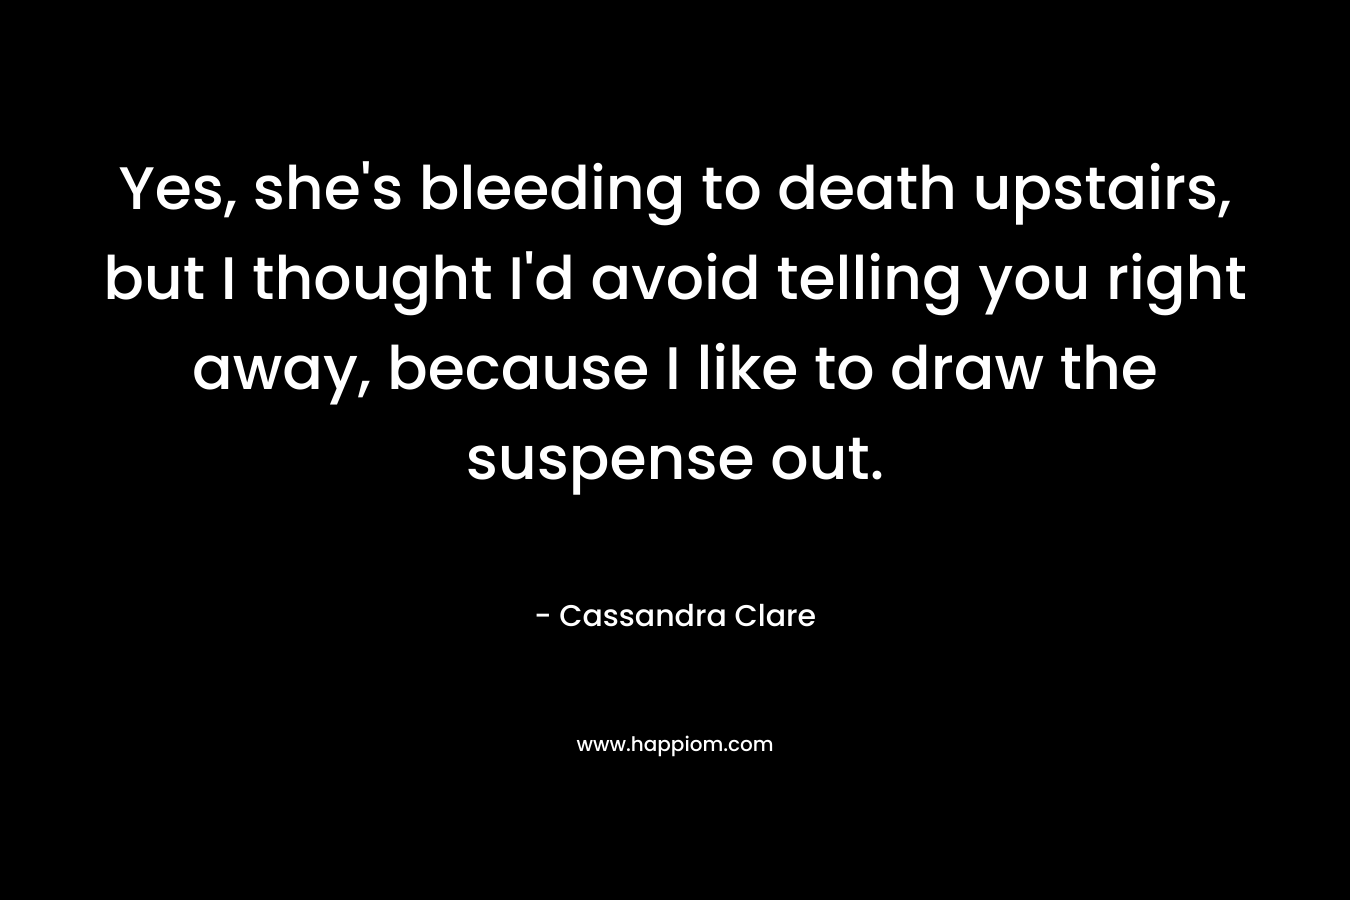 Yes, she’s bleeding to death upstairs, but I thought I’d avoid telling you right away, because I like to draw the suspense out. – Cassandra Clare